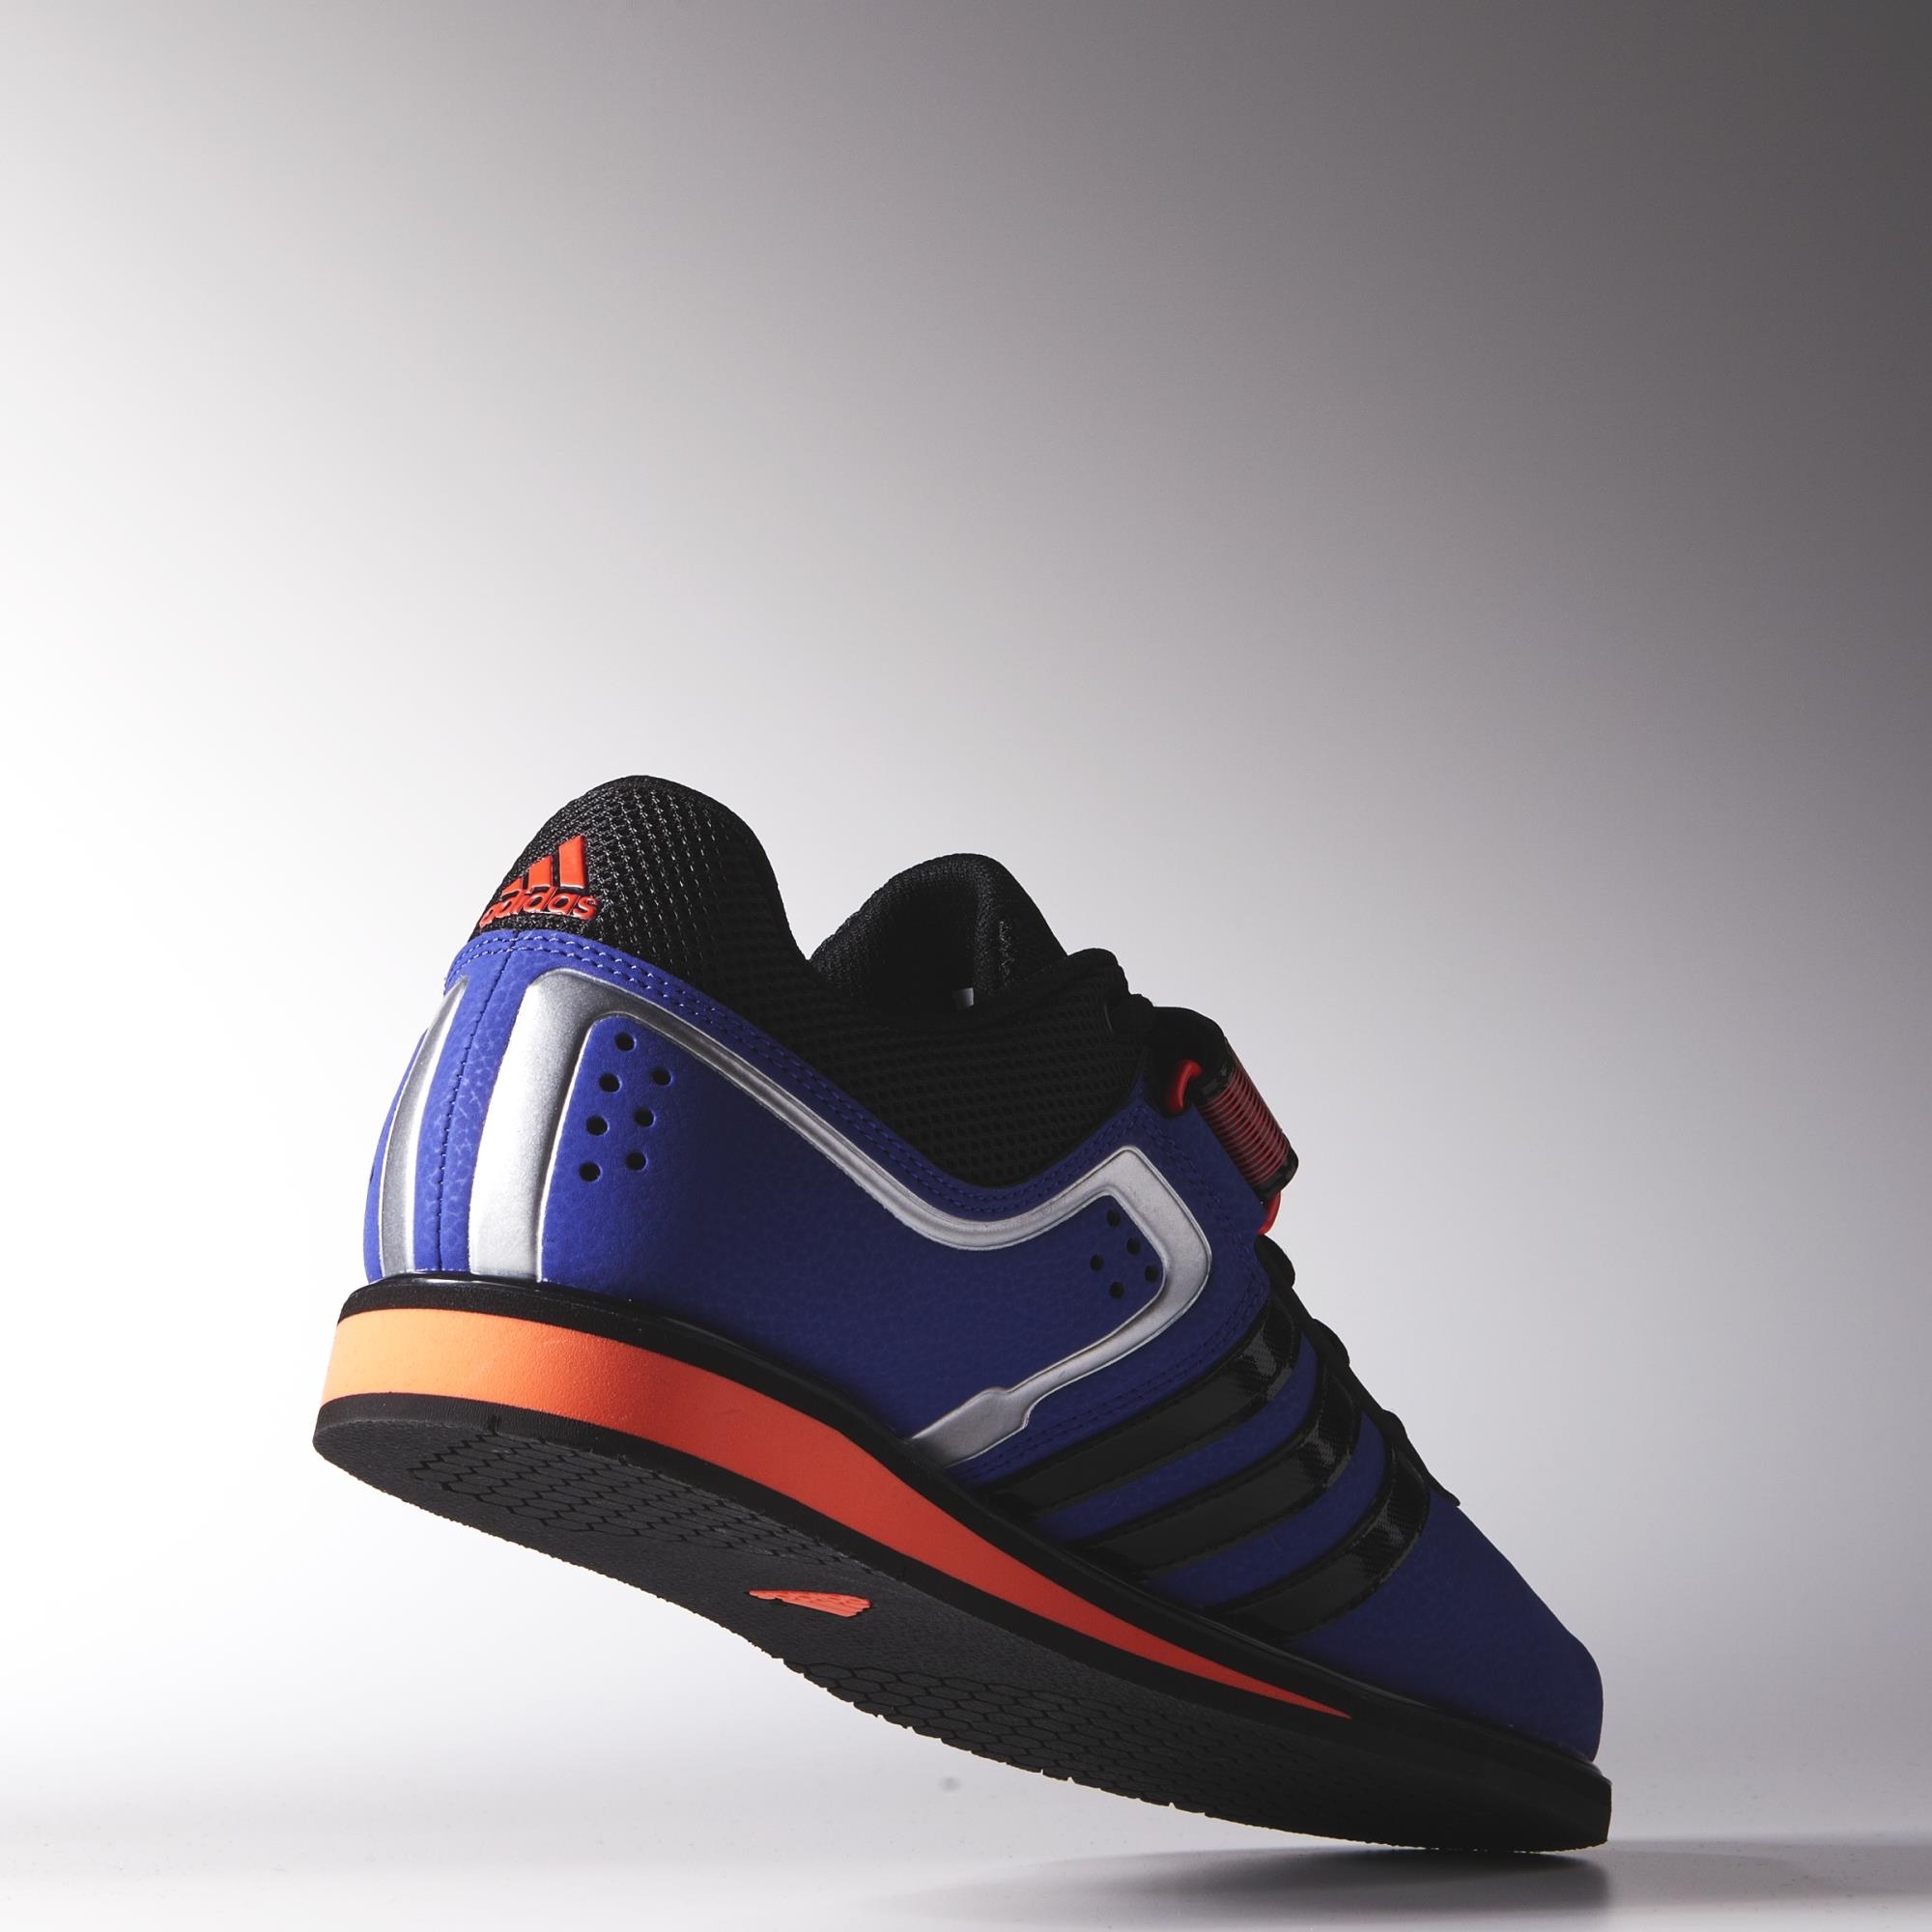 Adidas Powerlift 2.0 - Blue - Weightlifting Shoes - back